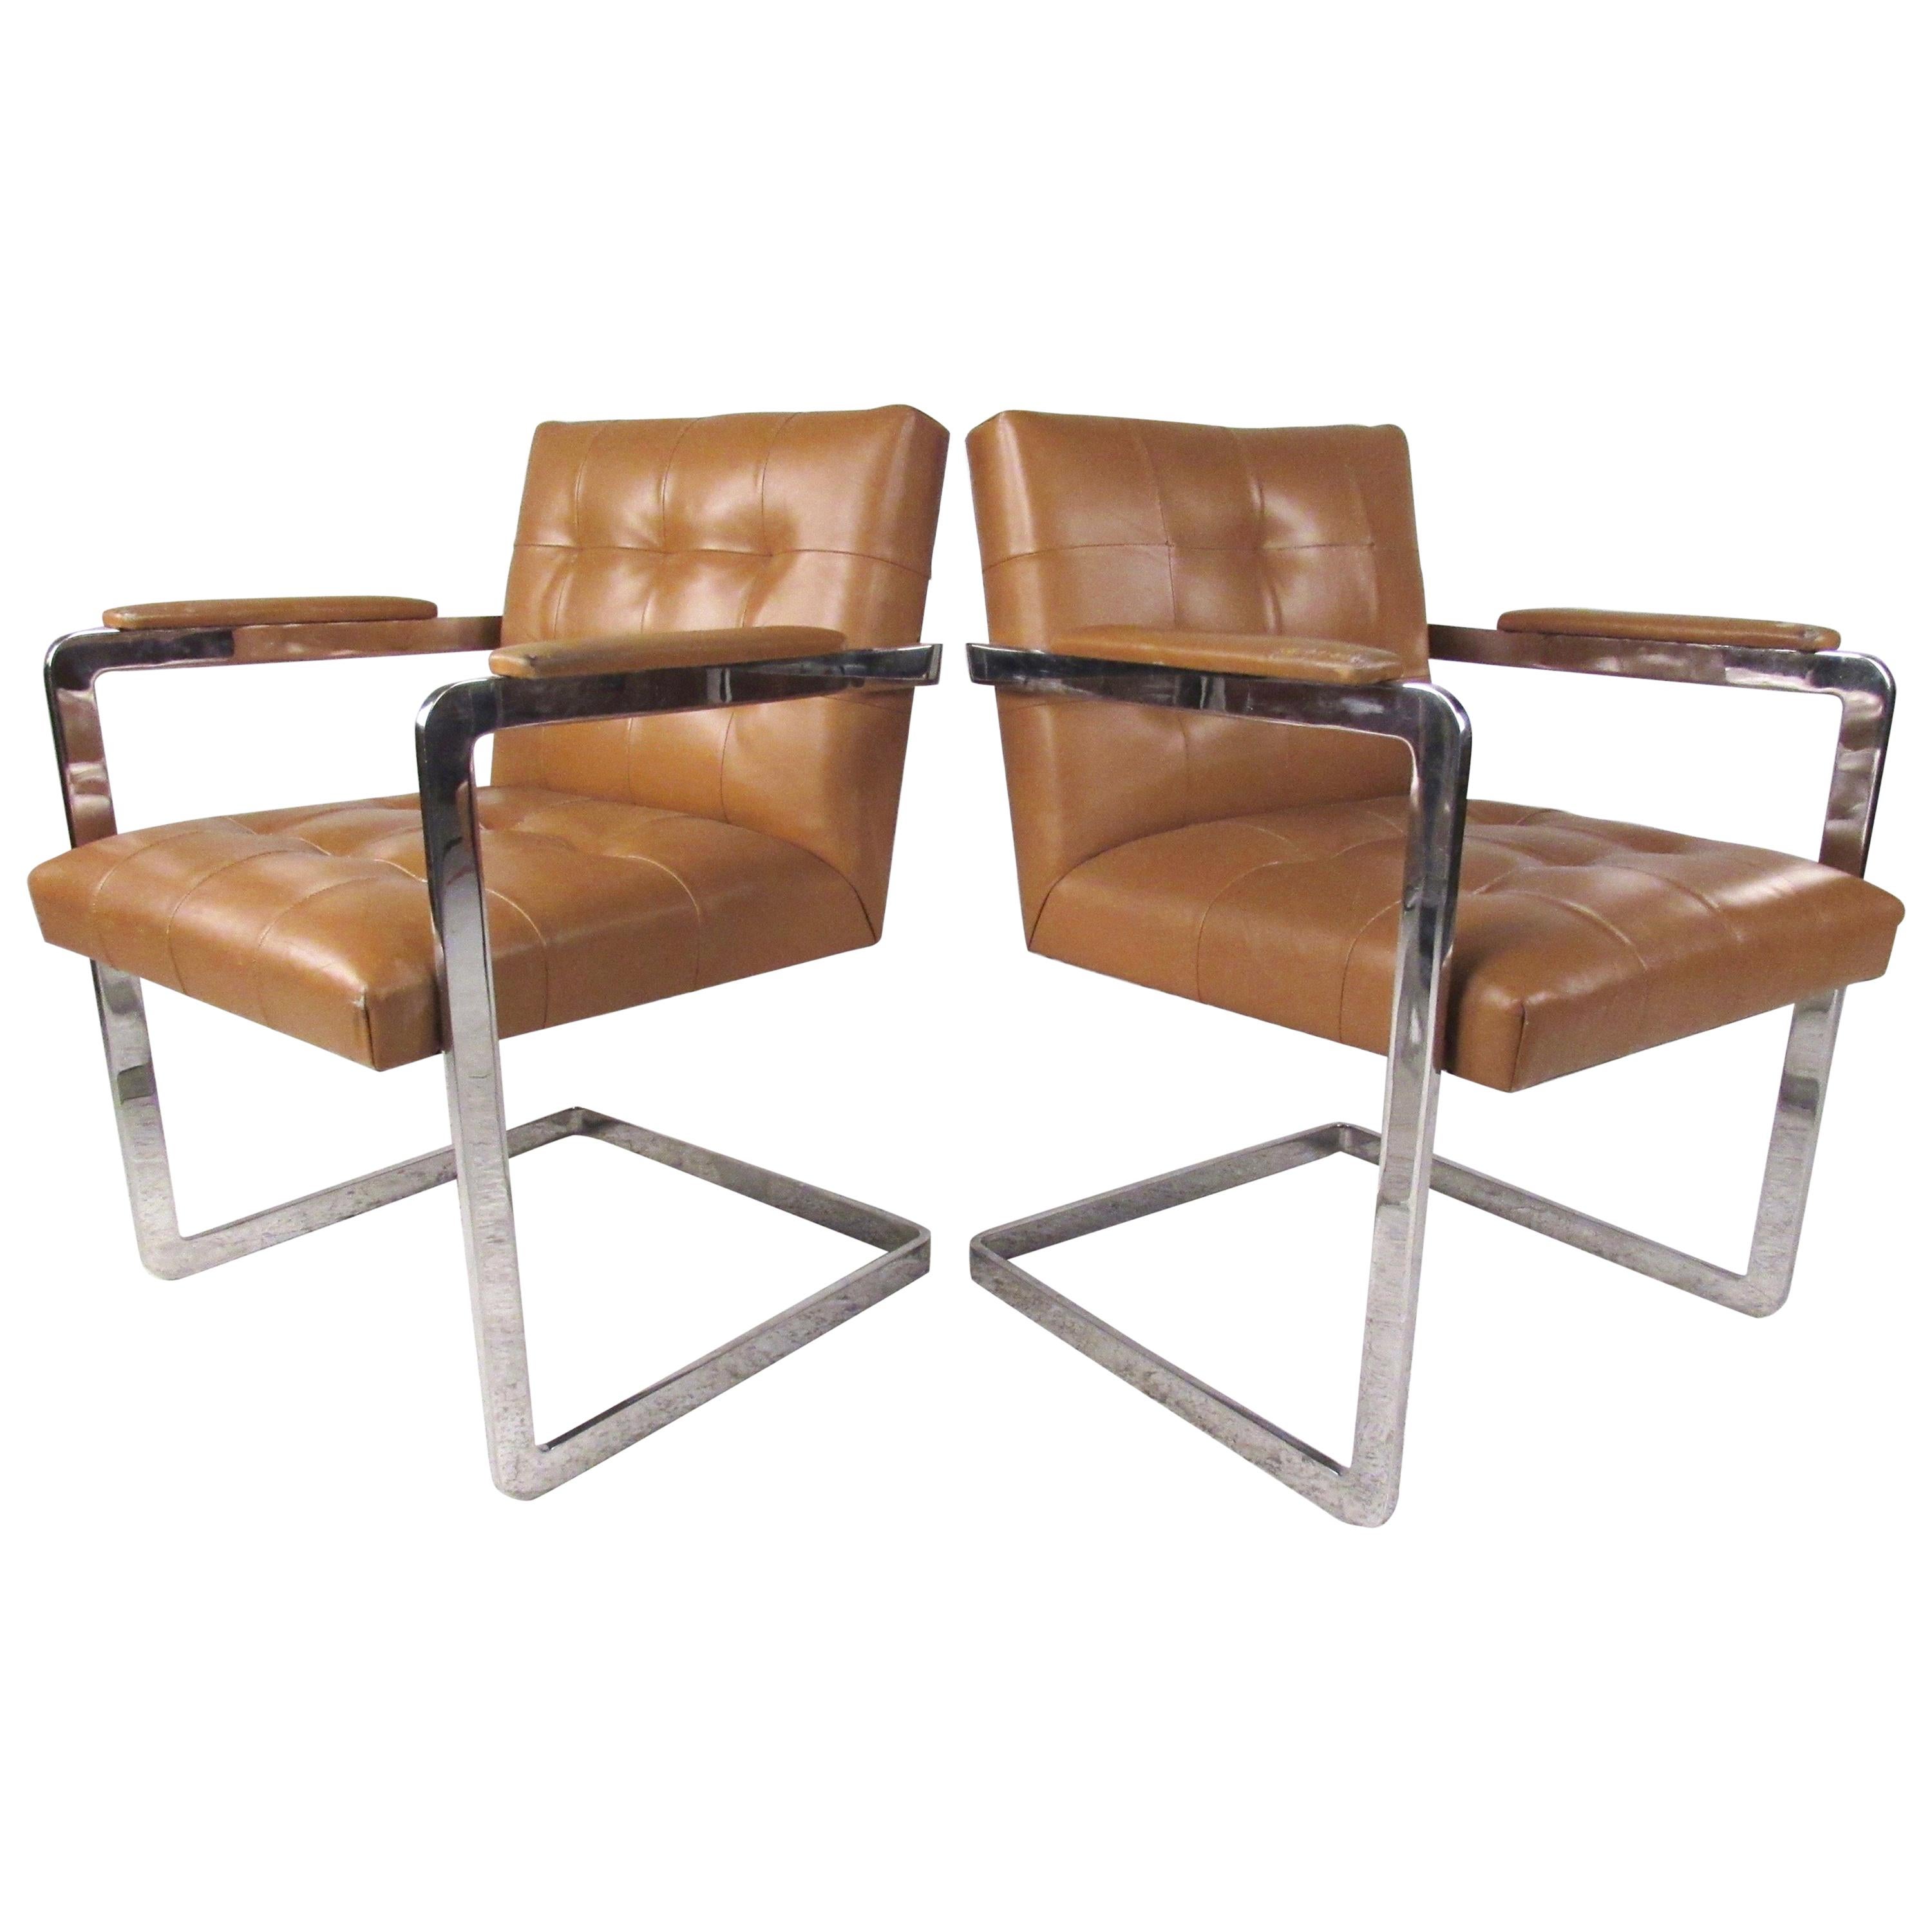 Pair Vintage Leather And Chrome Chairs, Leather Vintage Chair